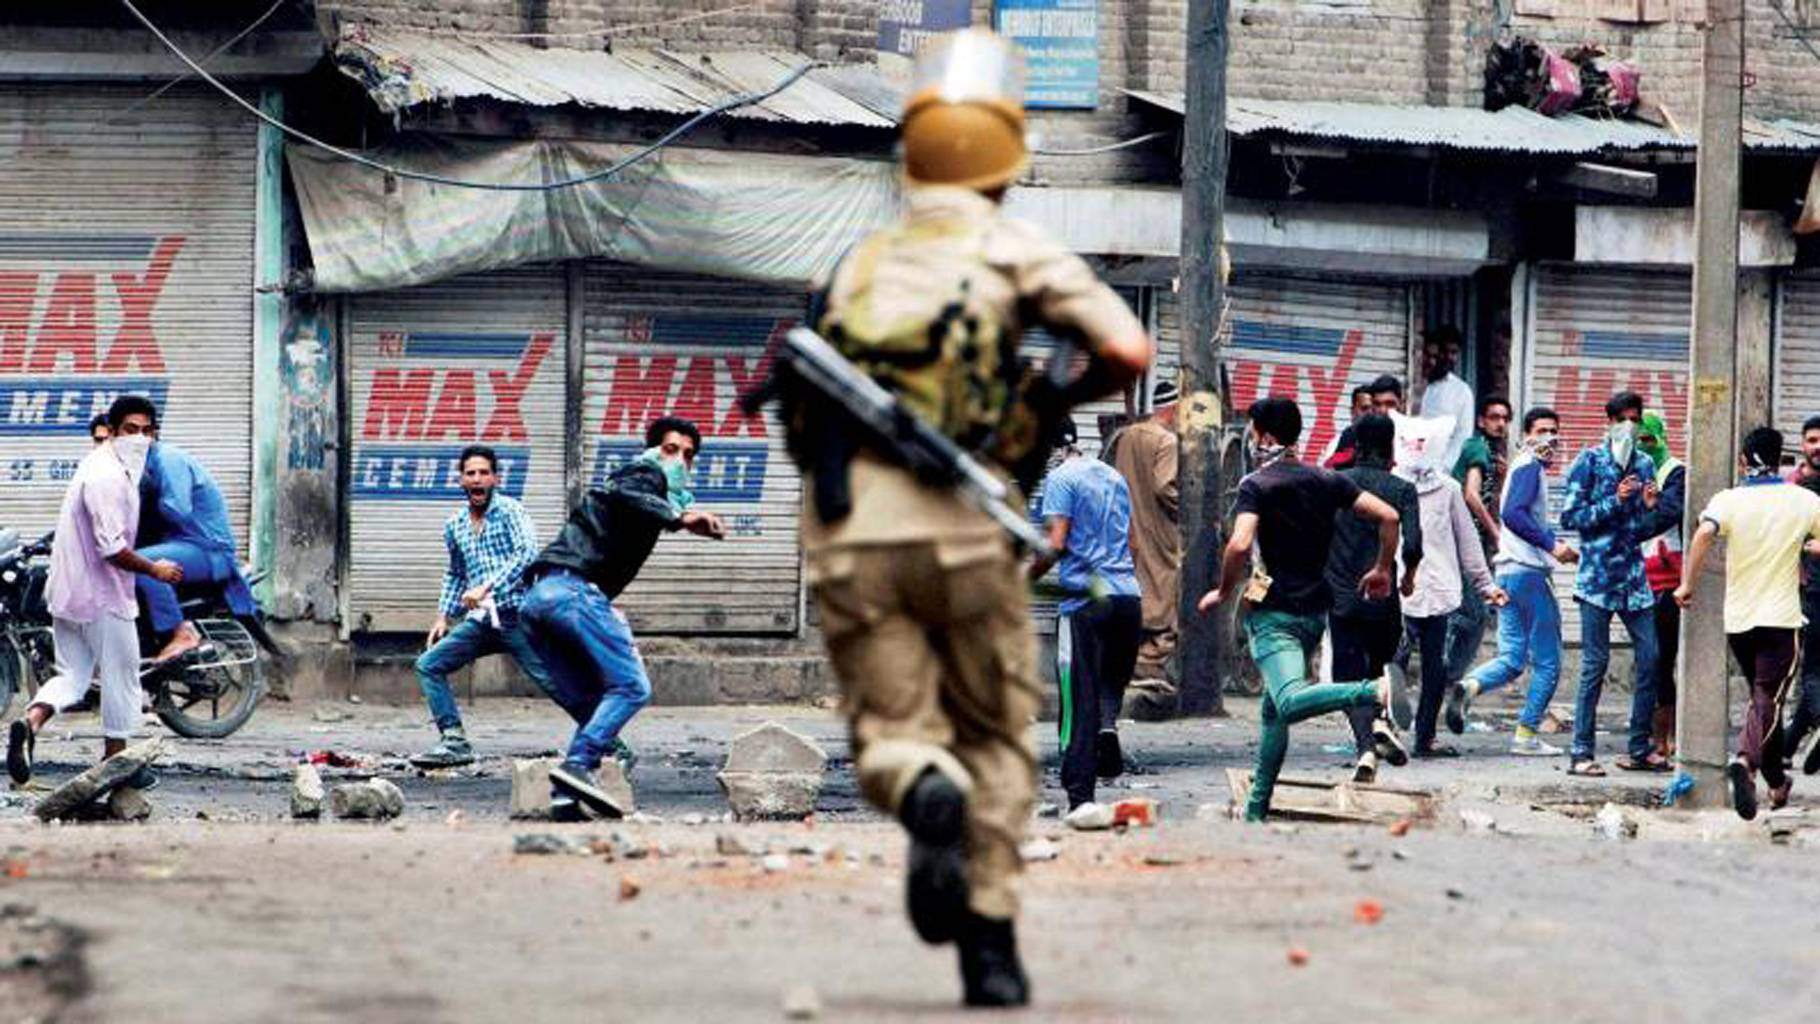 J&K : Is There a Serious Threat to Today’s Good Times?